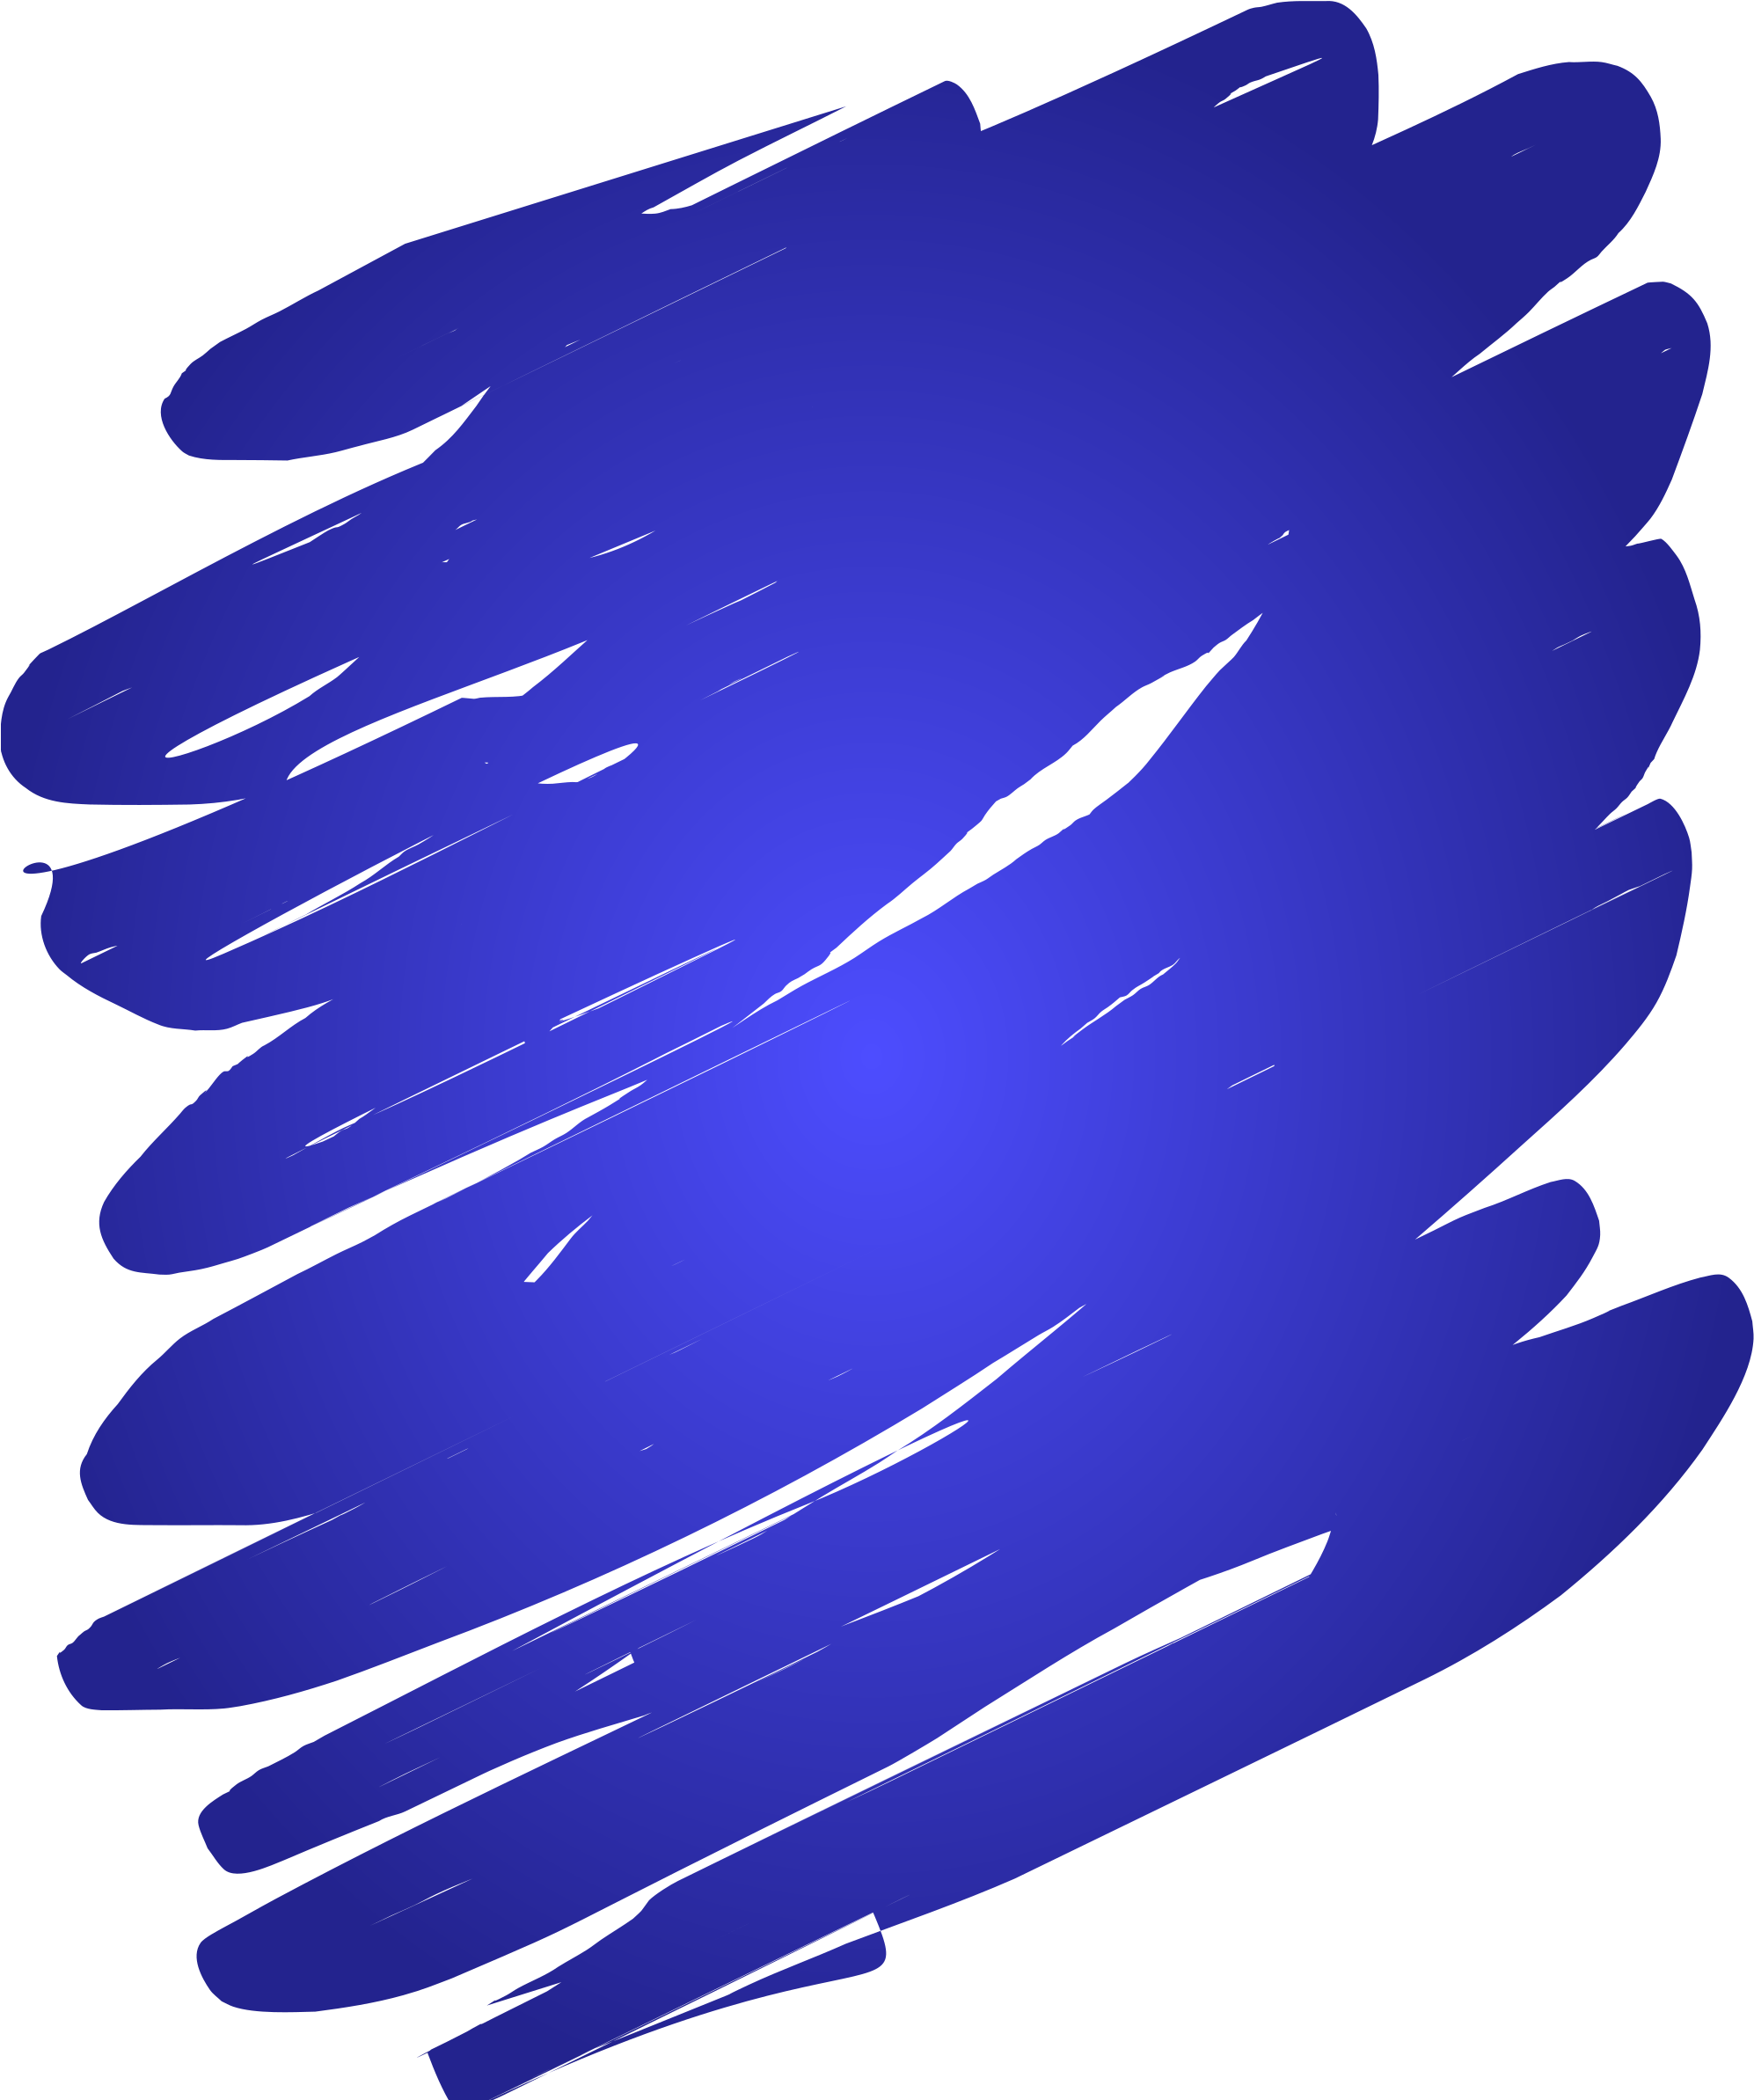 Blue Blend - Abstract Shapes Transparect Png (2005x2400)